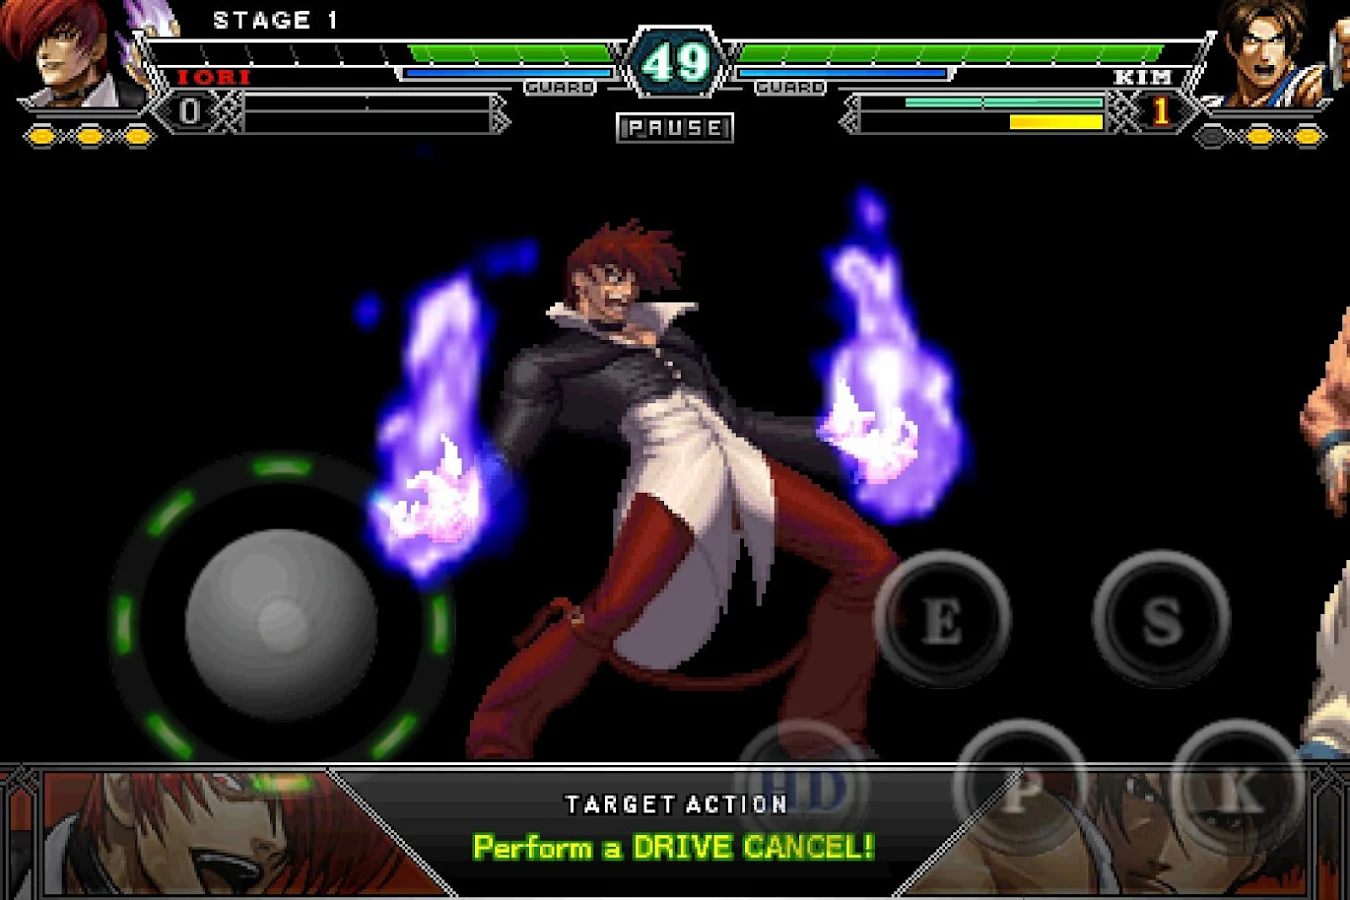  THE KING OF FIGHTERS-A 2012: captura de tela 